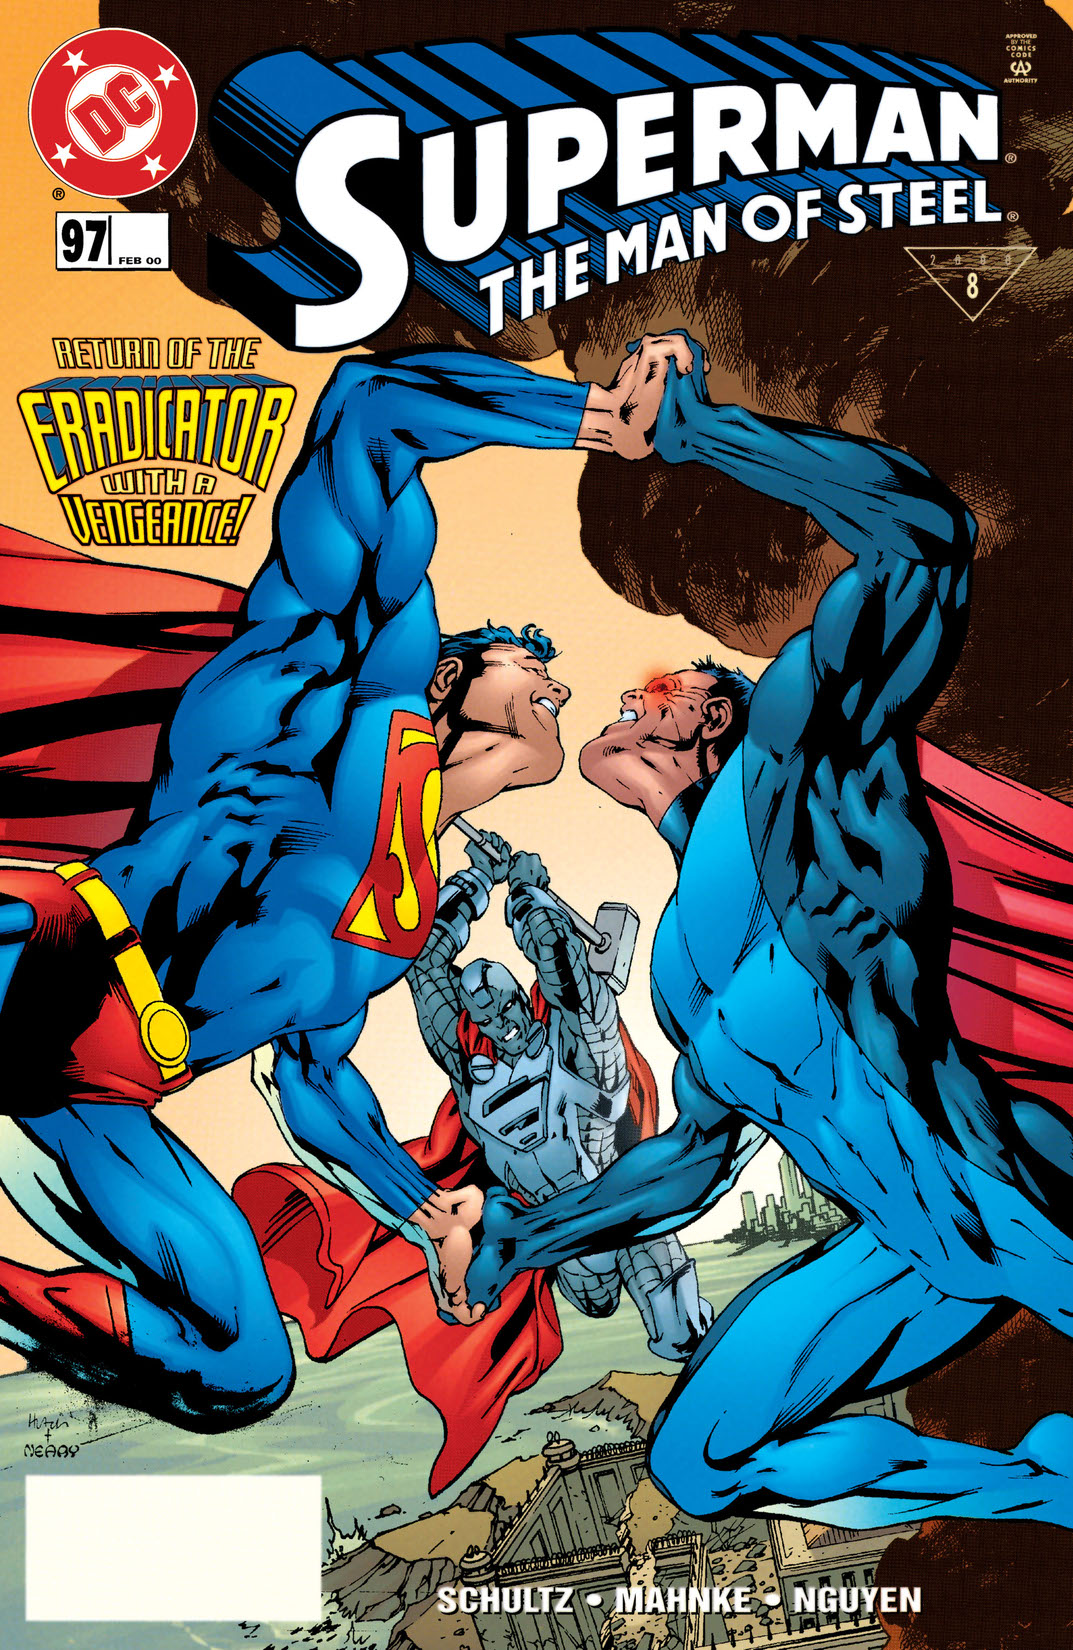 Superman: The Man of Steel #97 preview images